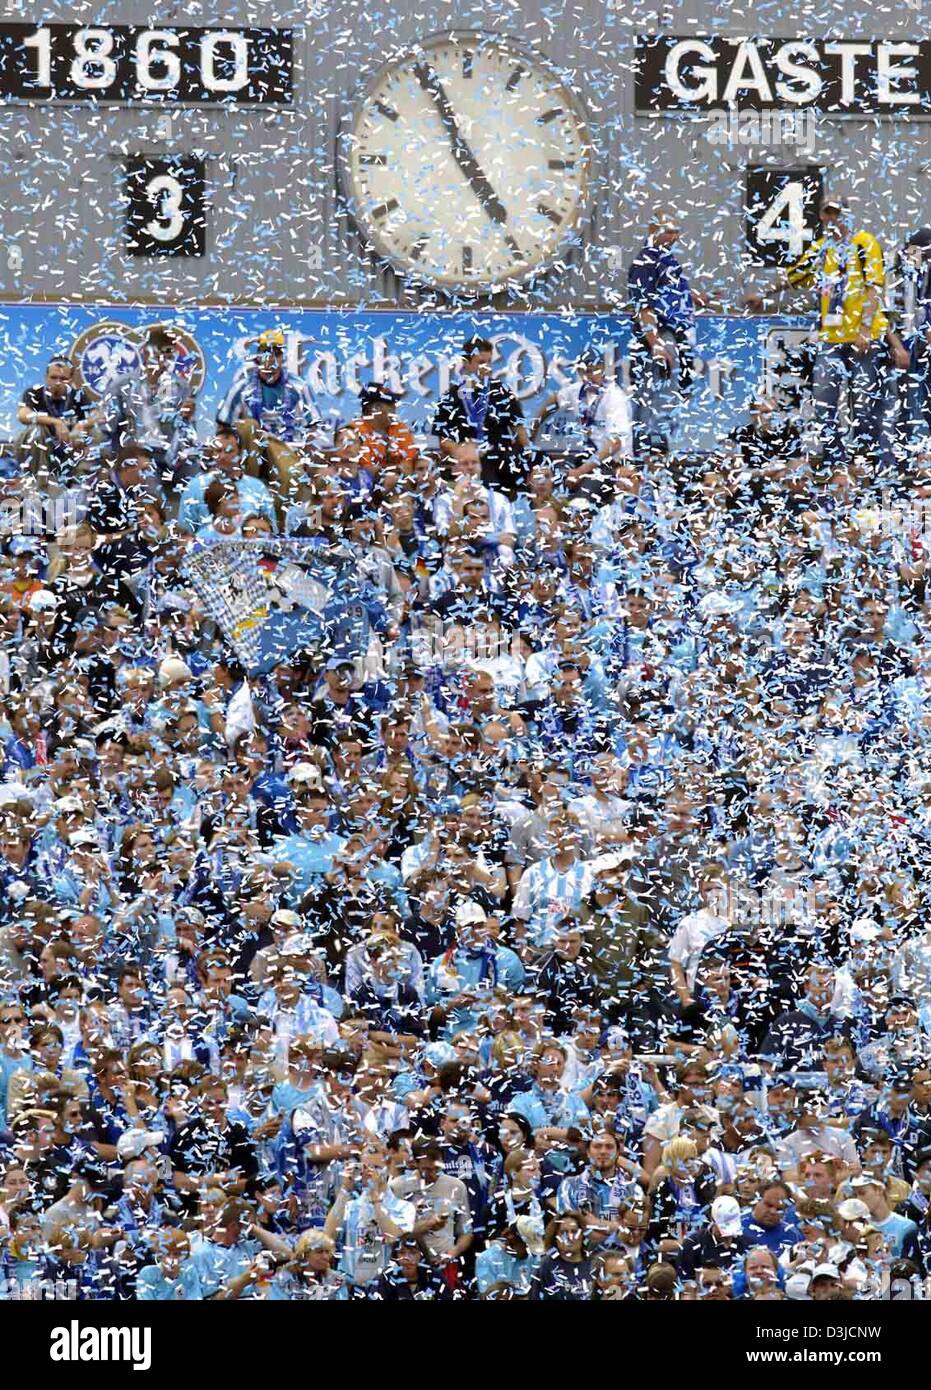 (dpa) - Supporters of Second Bundesliga club TSV 1860 Munich throw confetti after the referee's final blow into the whistle at the Gruenwalder stadium in Munich, Germany, 22 May 2005. Stock Photo